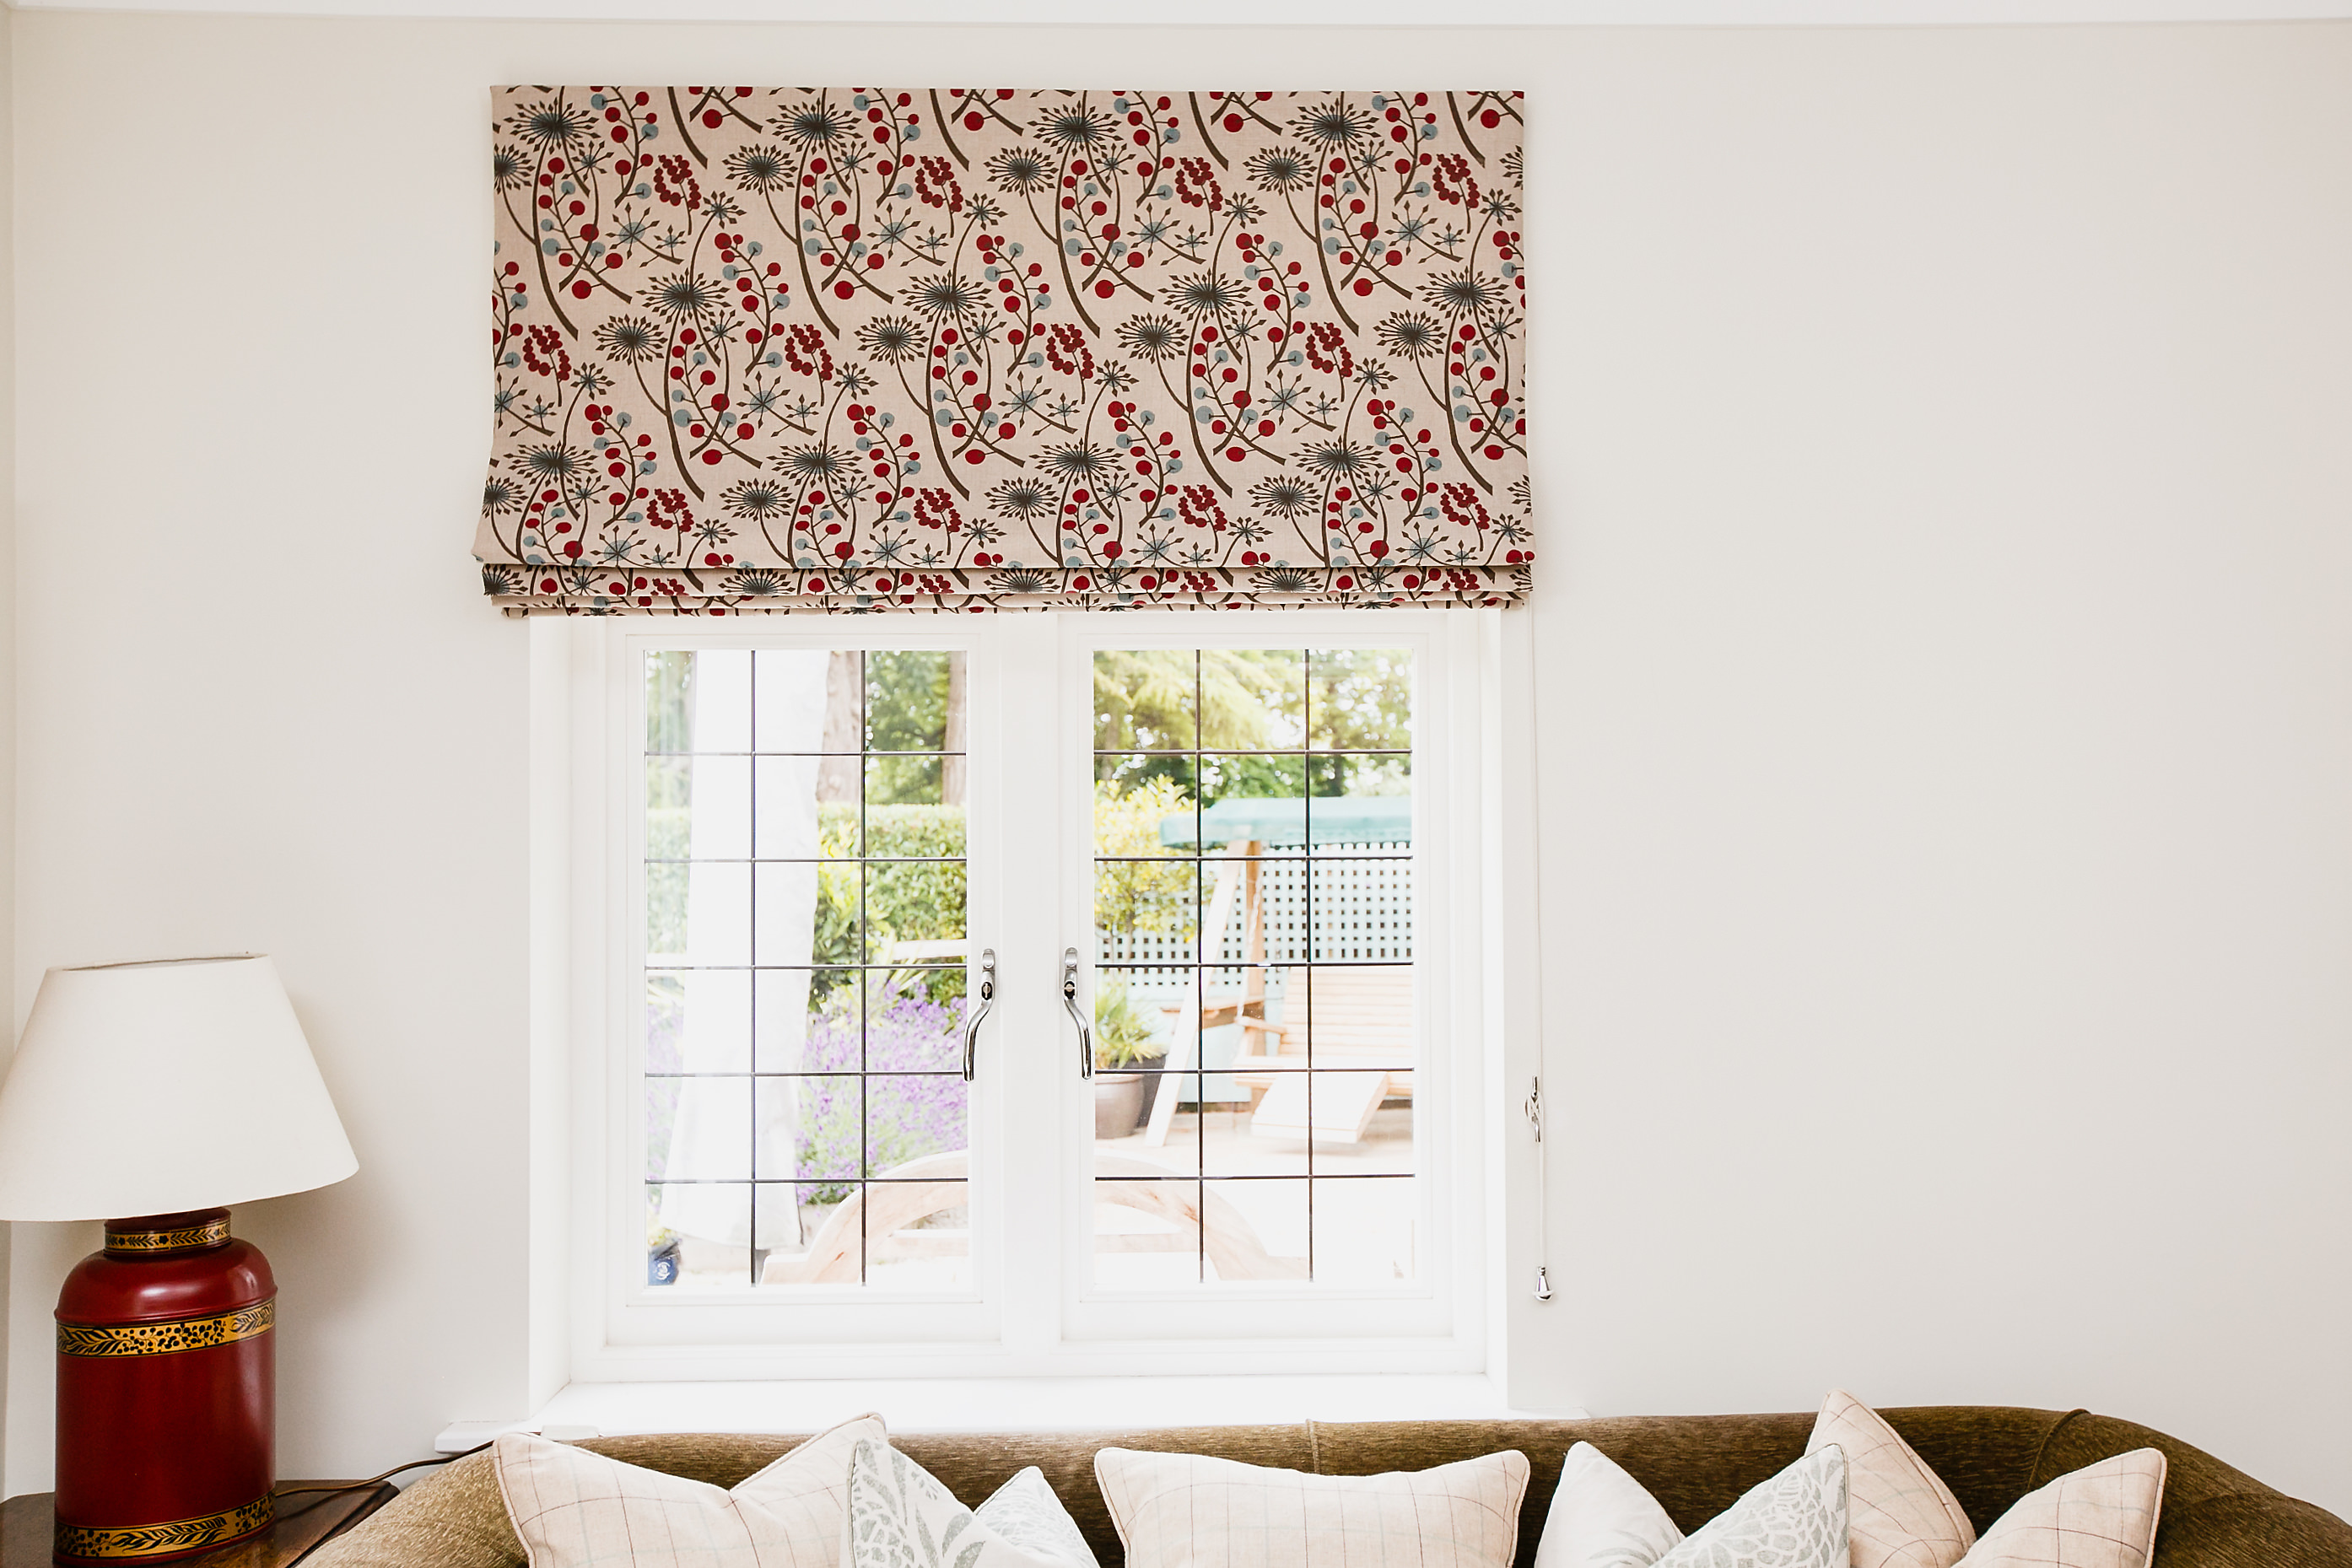 Guildford kitchen : roman blind in red blue fabric